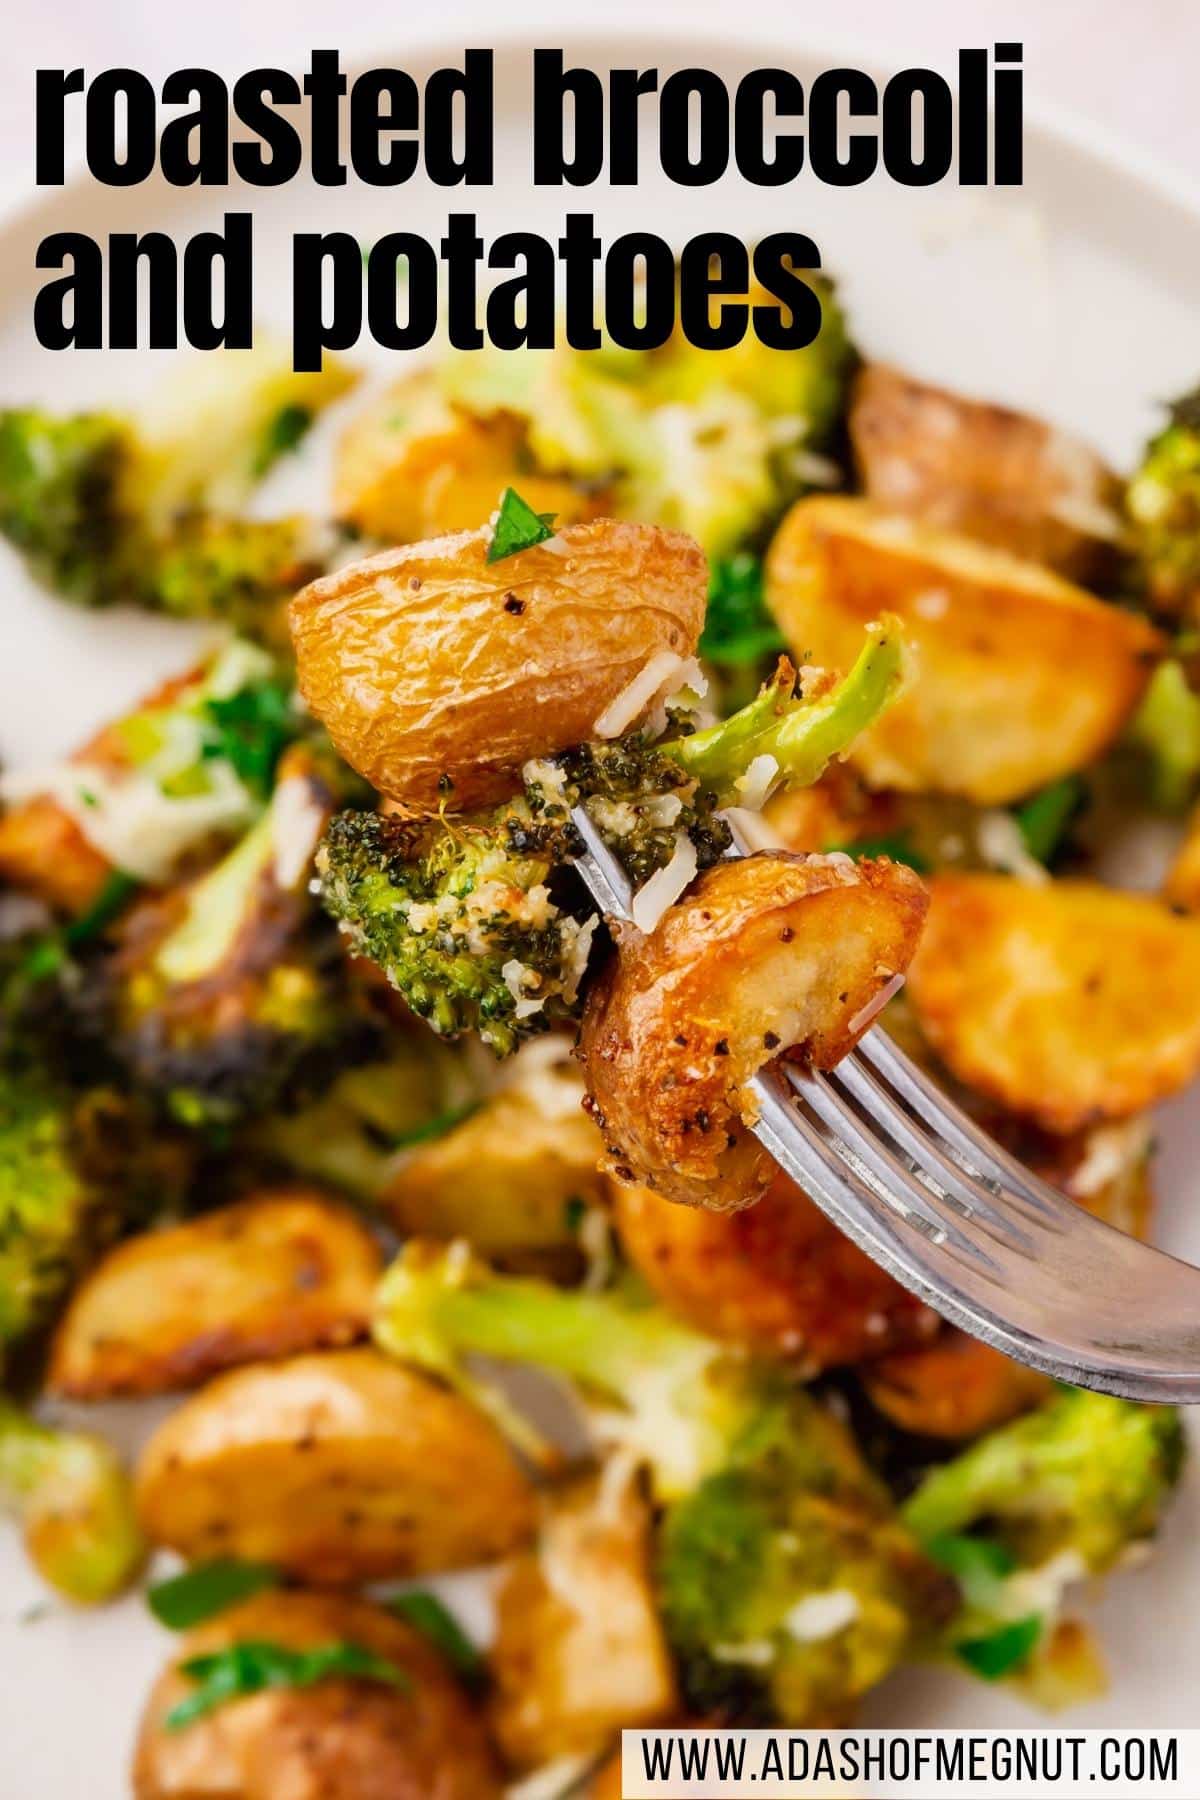 A fork digging into a few pieces of roasted broccoli and baby potatoes with parmesan with a text overlay over the image.